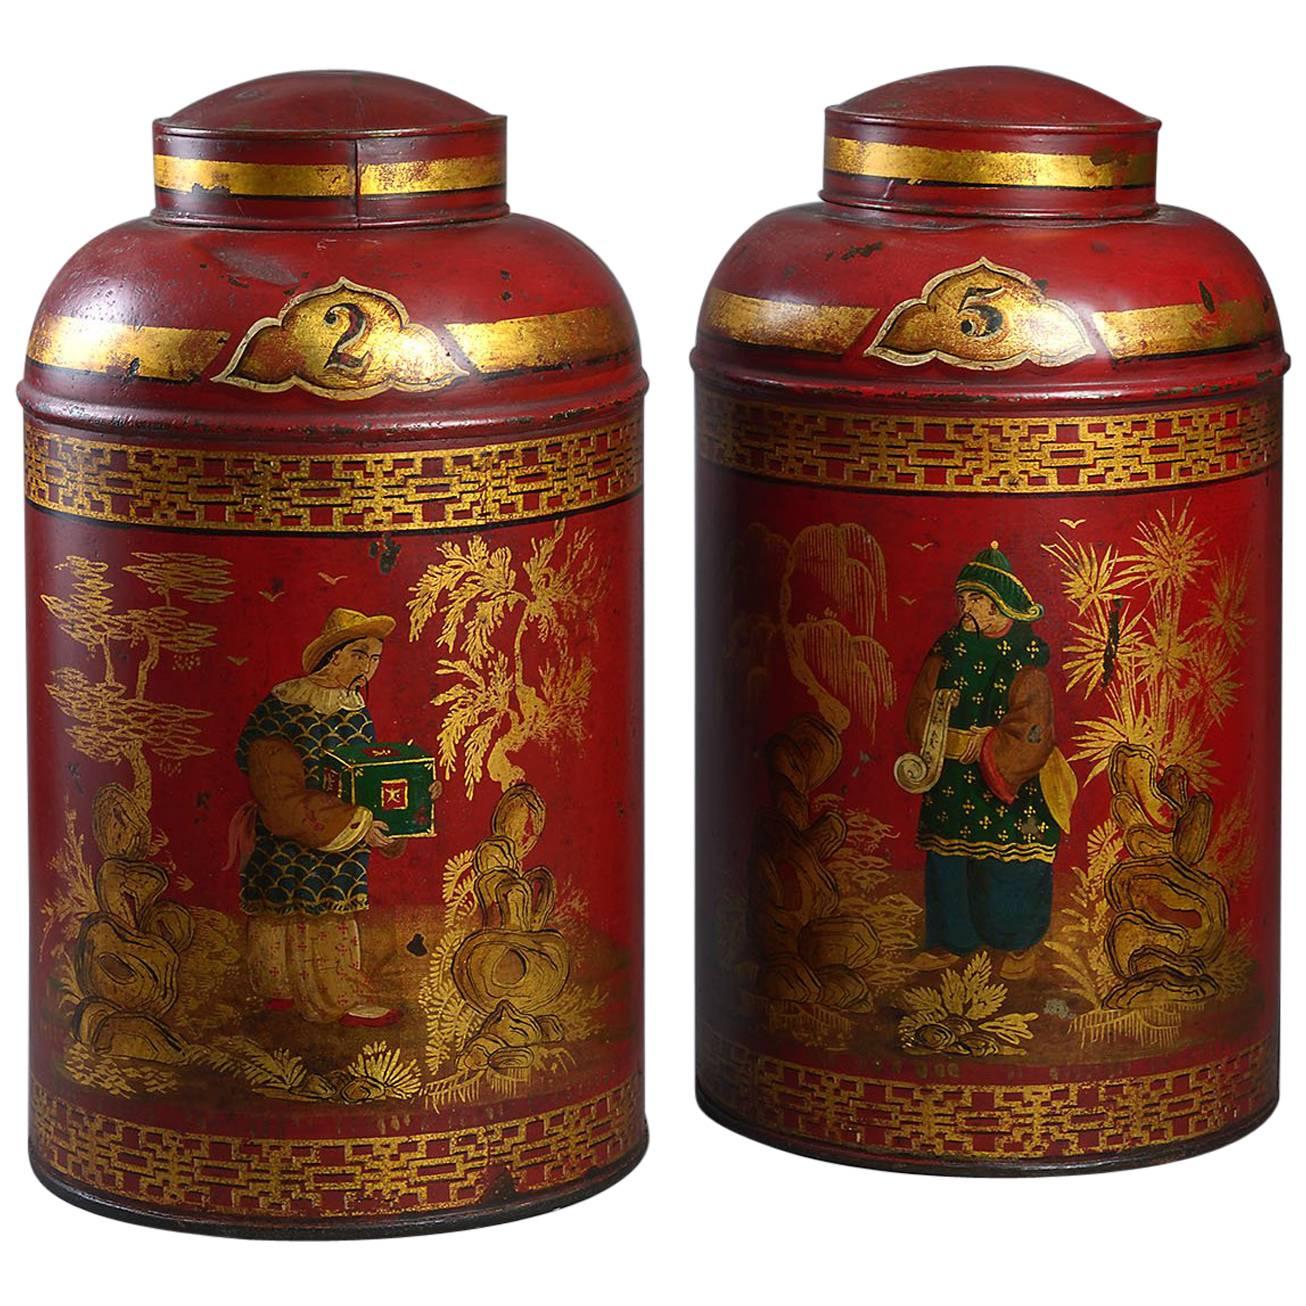 Rare Pair of Early 19th Century Regency Red Lacquer Toleware Tea Canisters